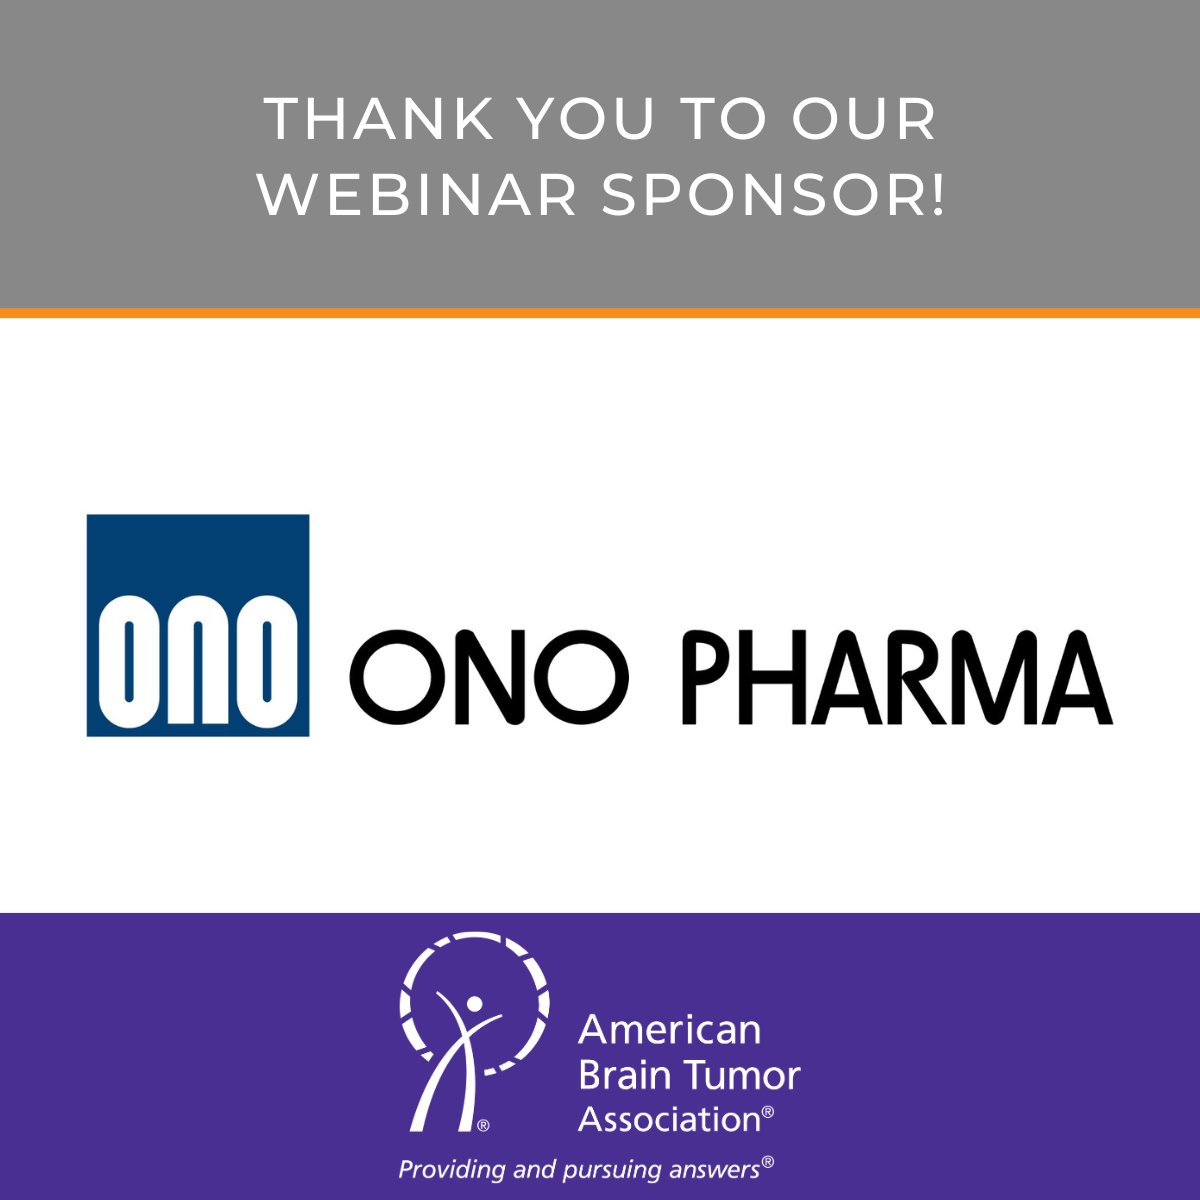 Yesterday's webinar was a success! Thank you to all who attended and thank you to our sponsor for everything they do! #BTSM